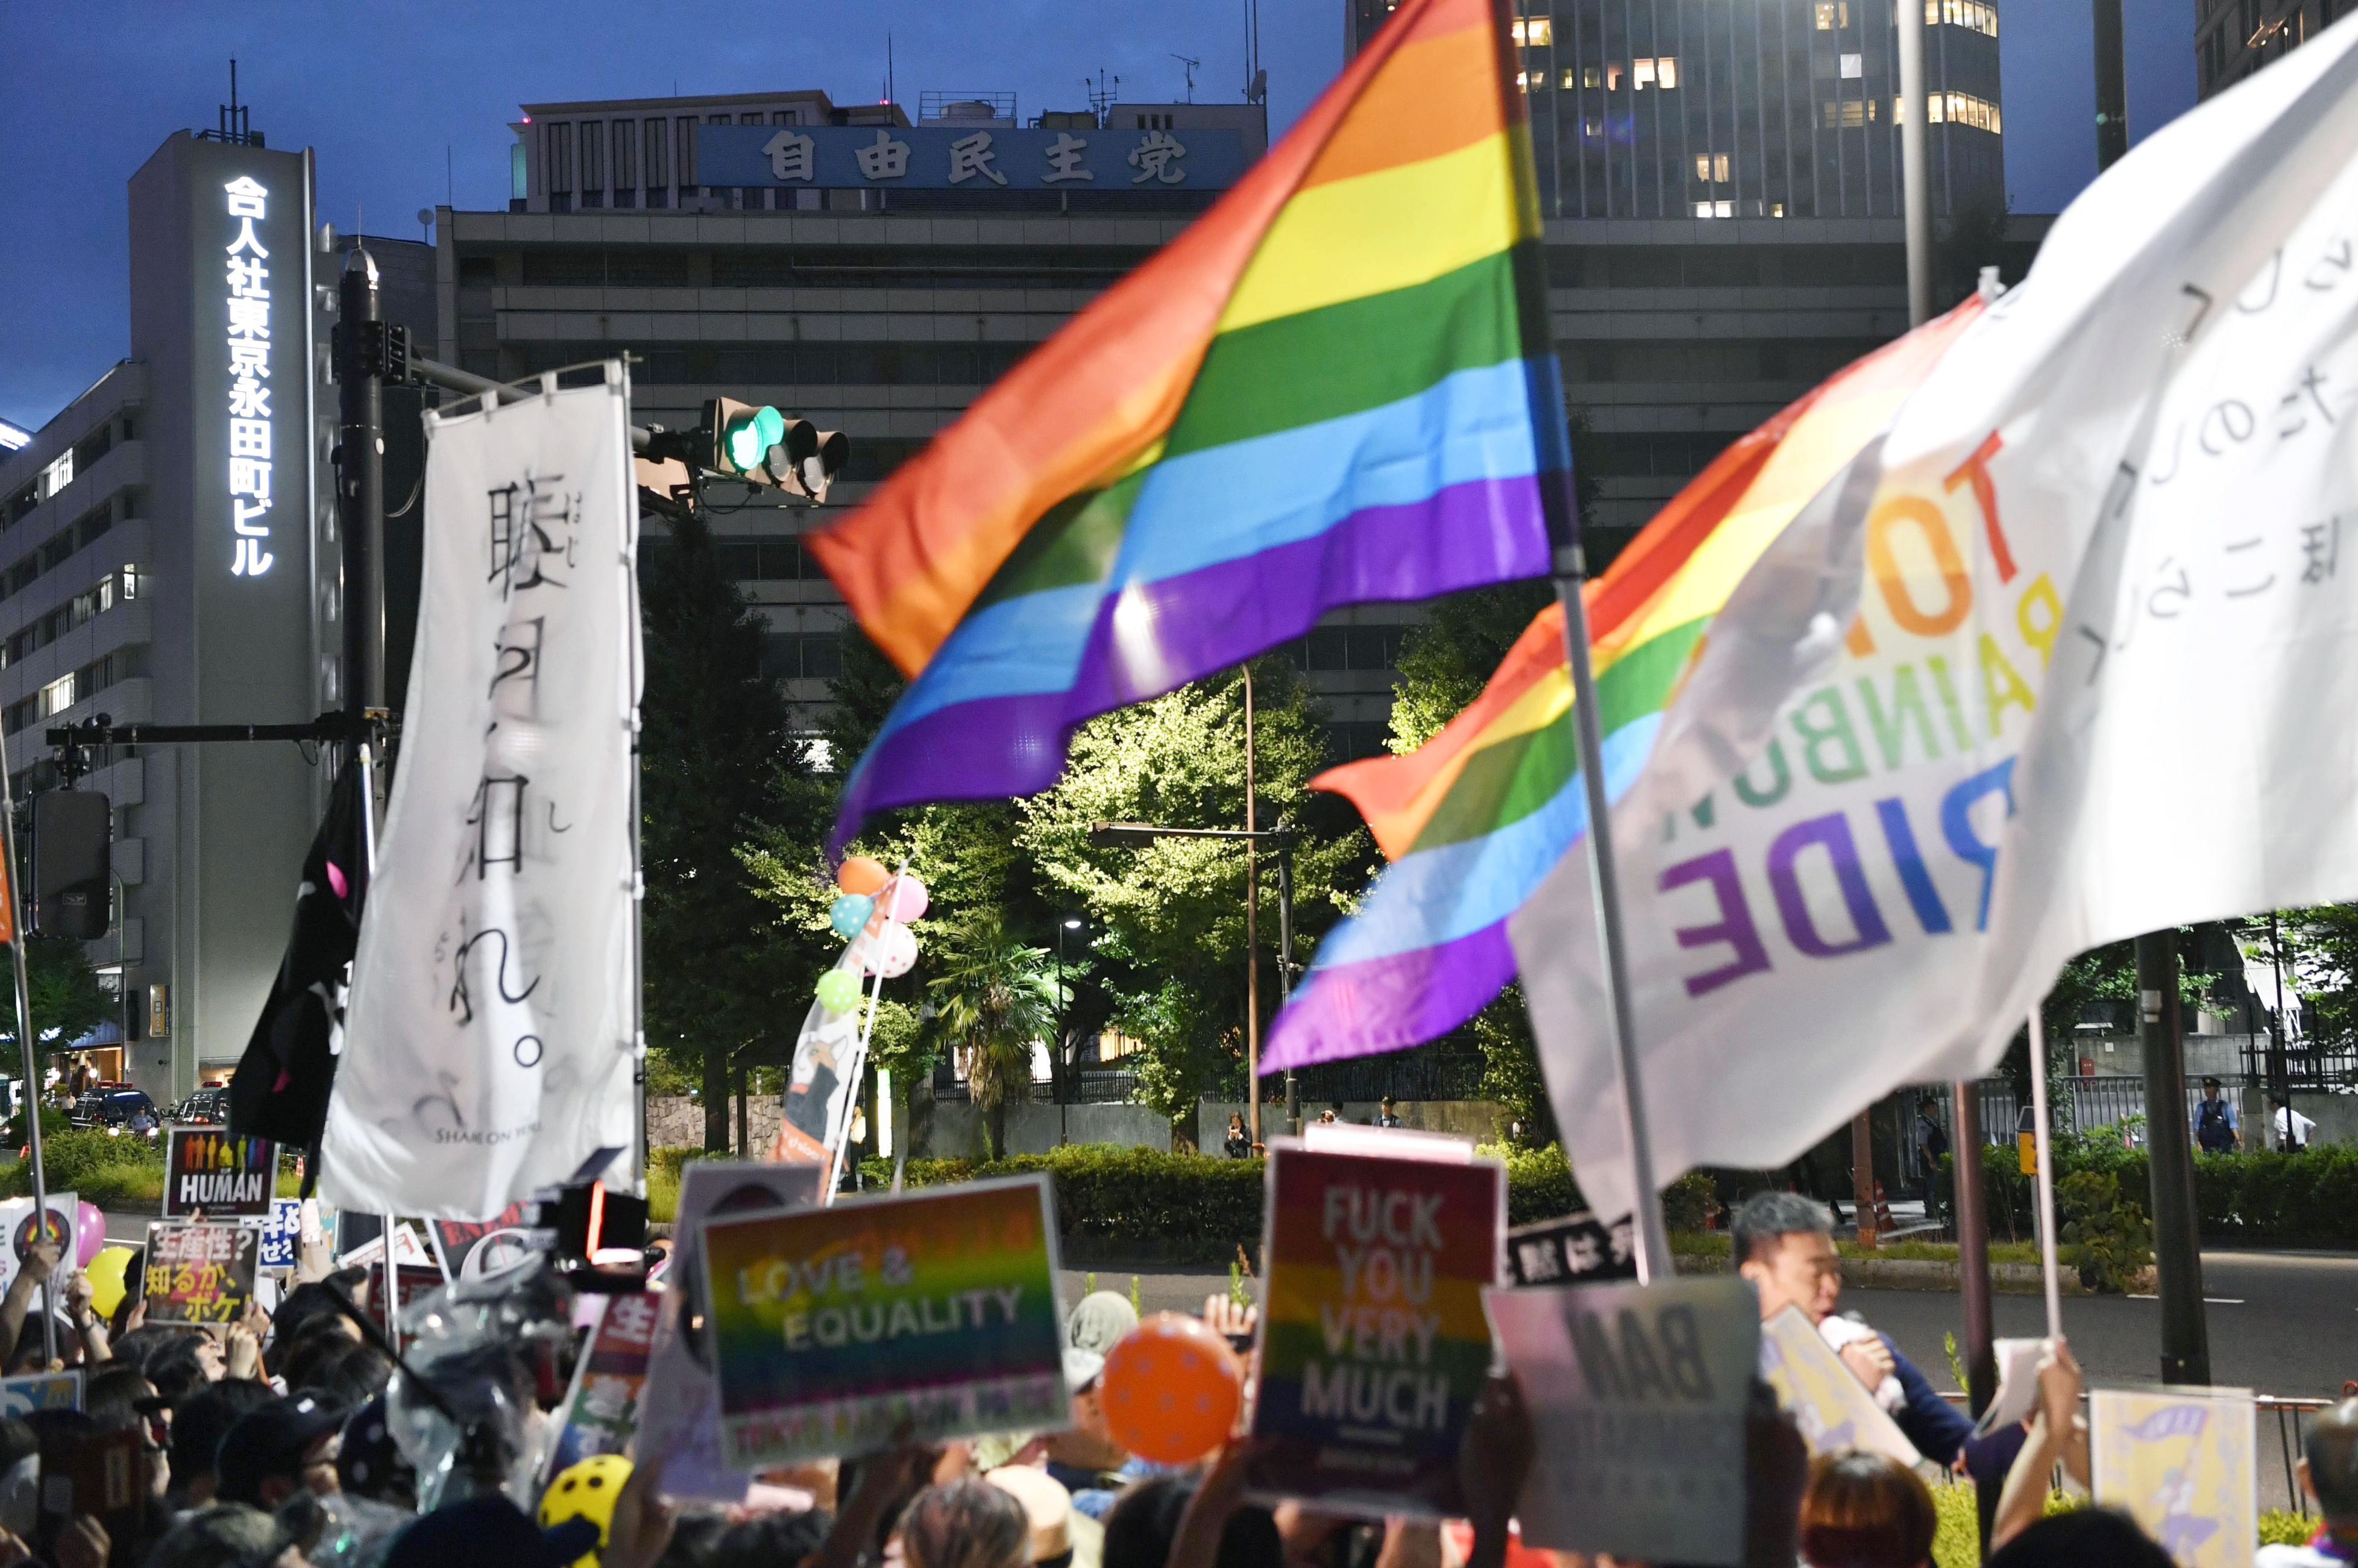 Japanese Same Sex Couples Sue For Equal Marital Rights Inquirer News